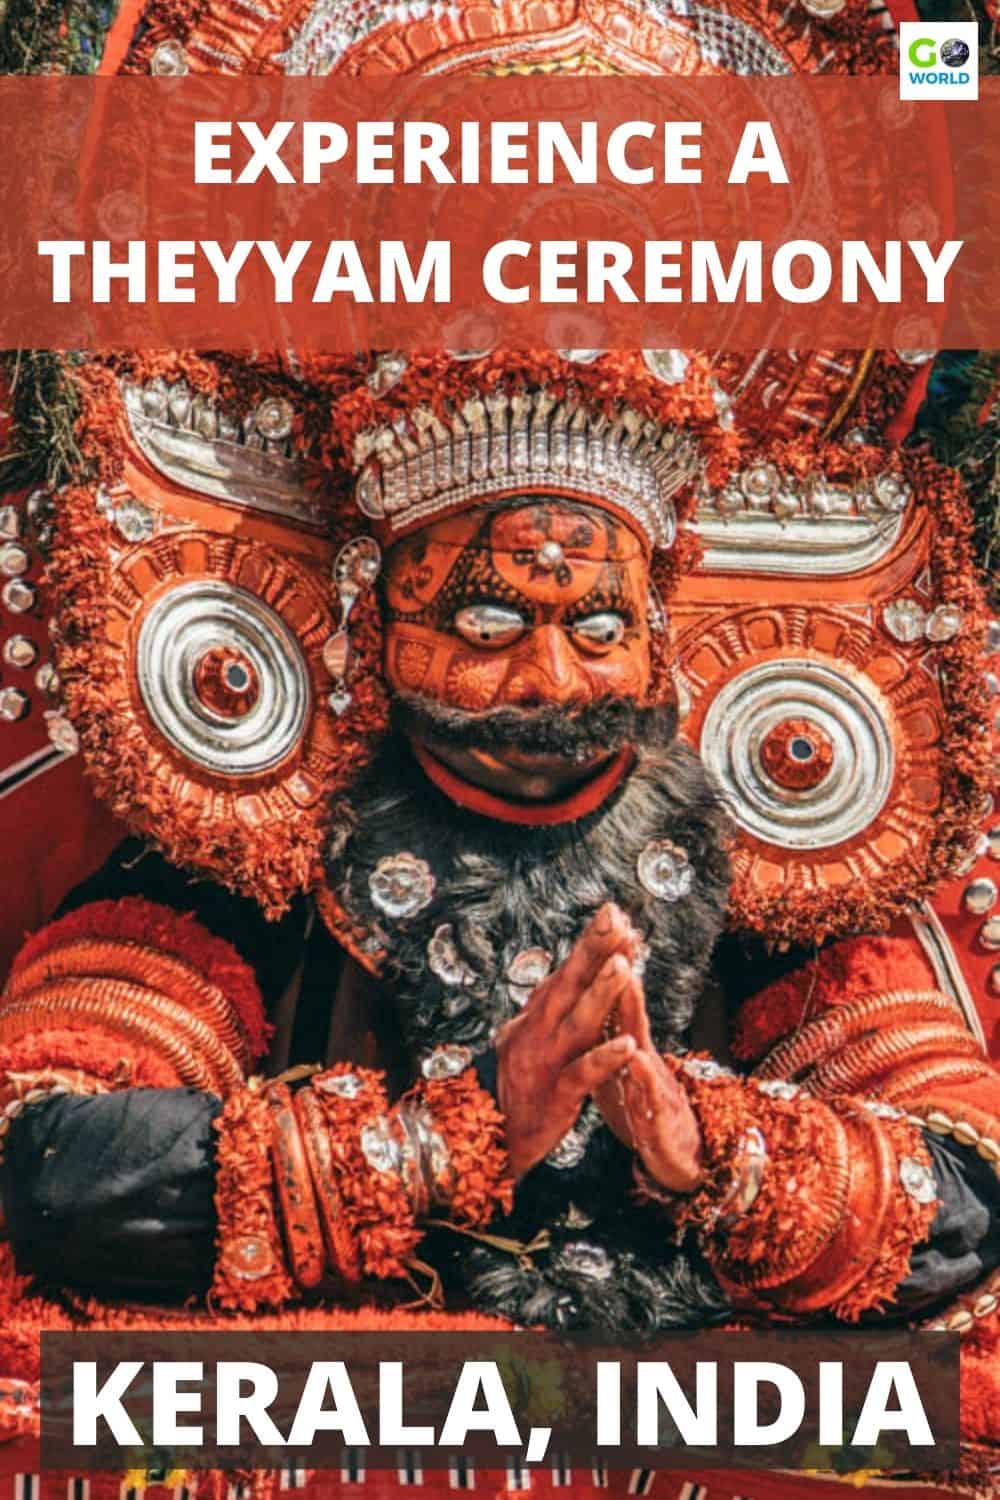 The Theyyam ceremony takes place in Kerala India. Journey with the author to experience colorful Theyyam become Gods and walk through fire. #Keralaindia #theyyamceremony